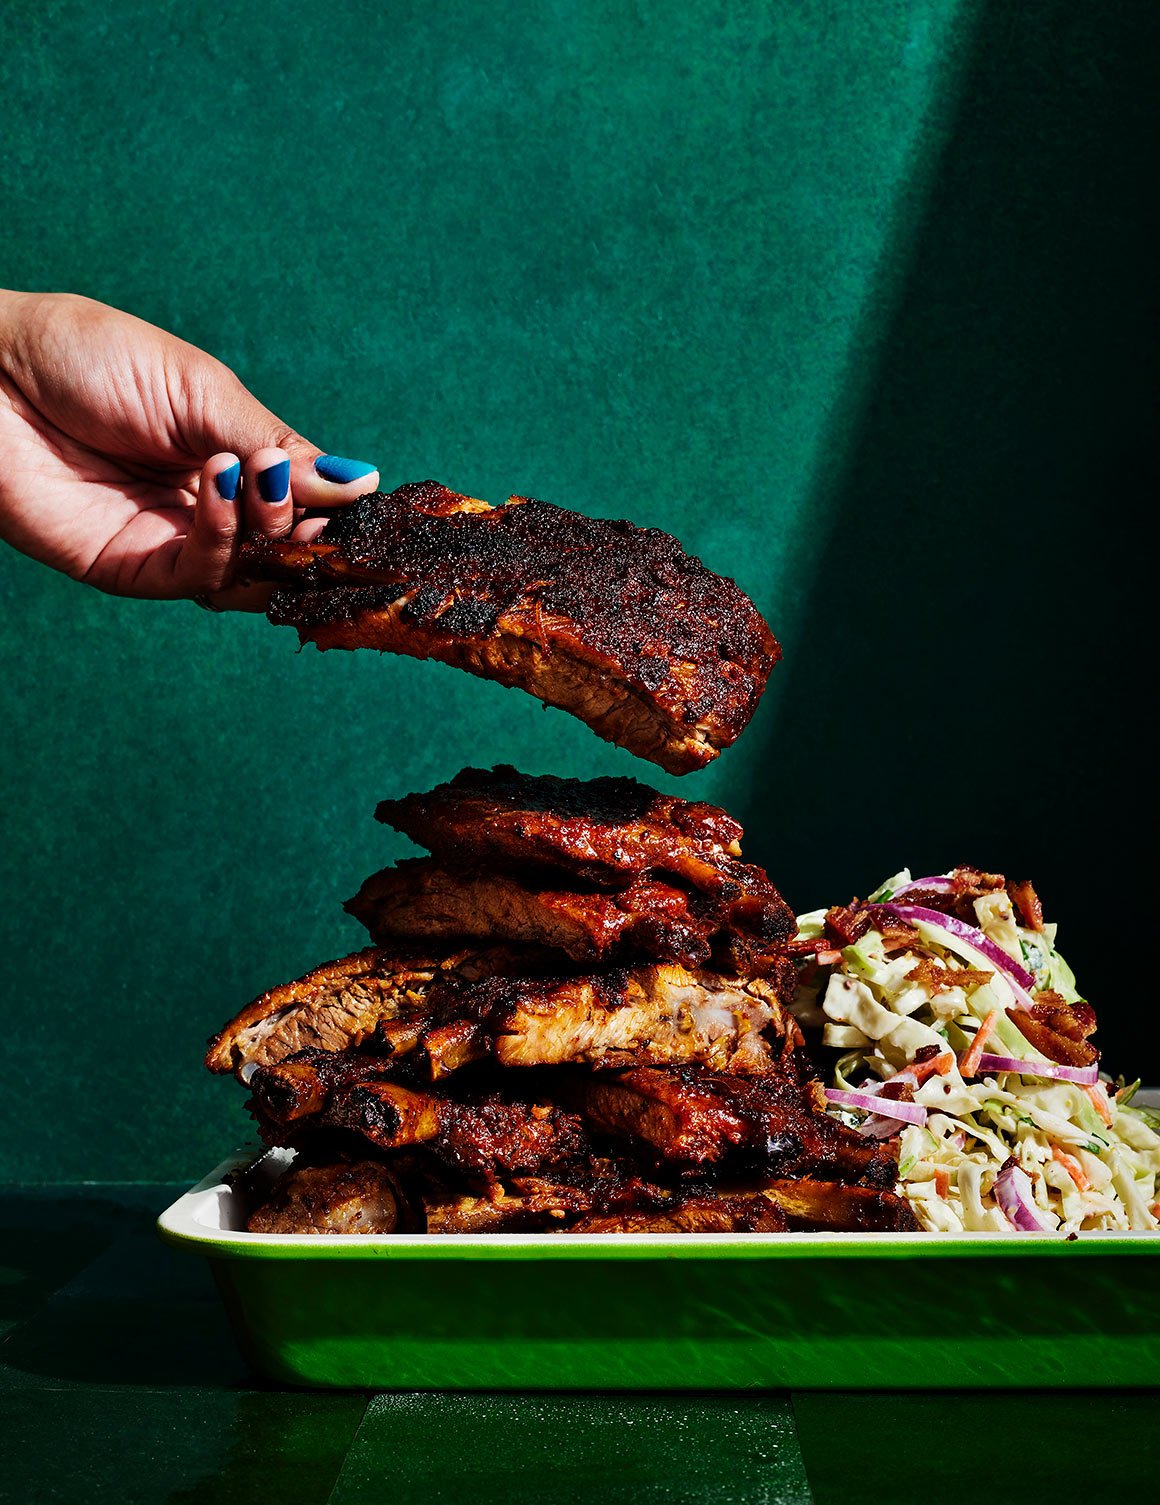 Shaquille-Oneal-celebrity-cookbook-Family-stlye-Ribs-recipe.jpg